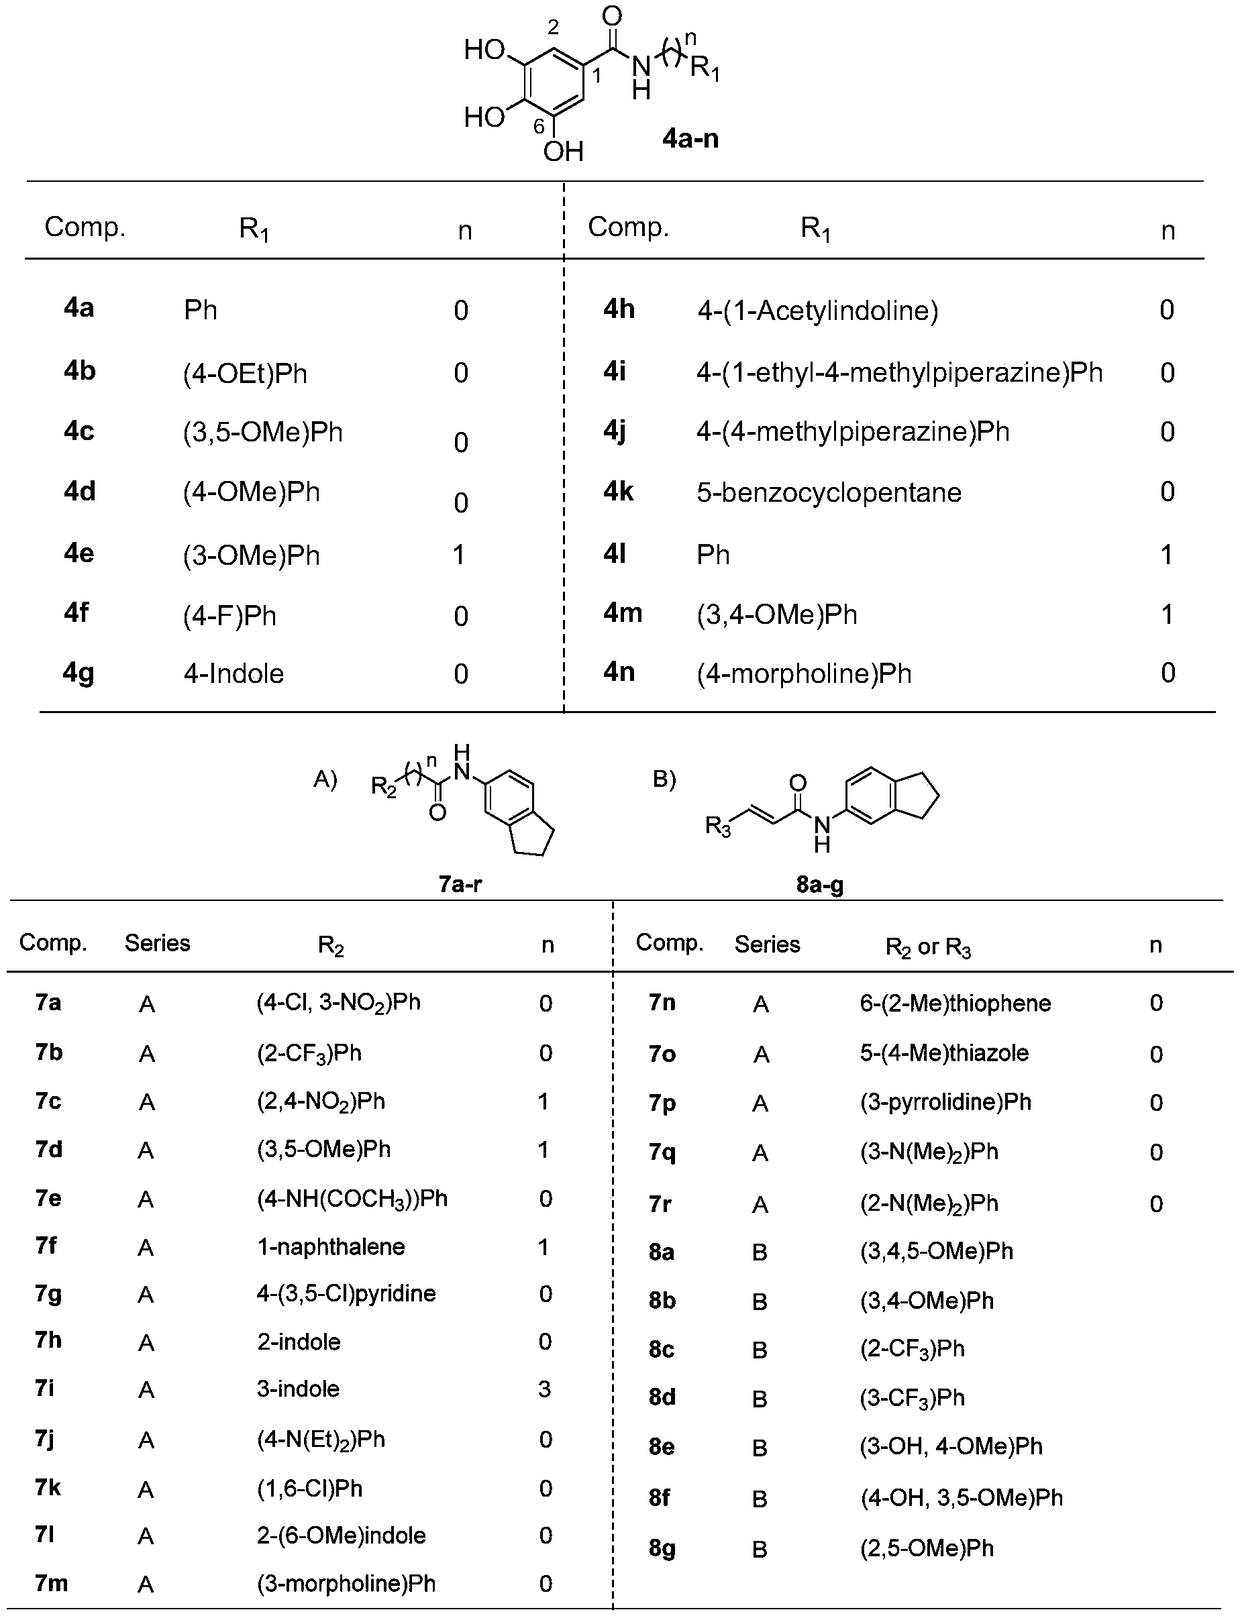 Methyl gallate analogue containing amide structure and application